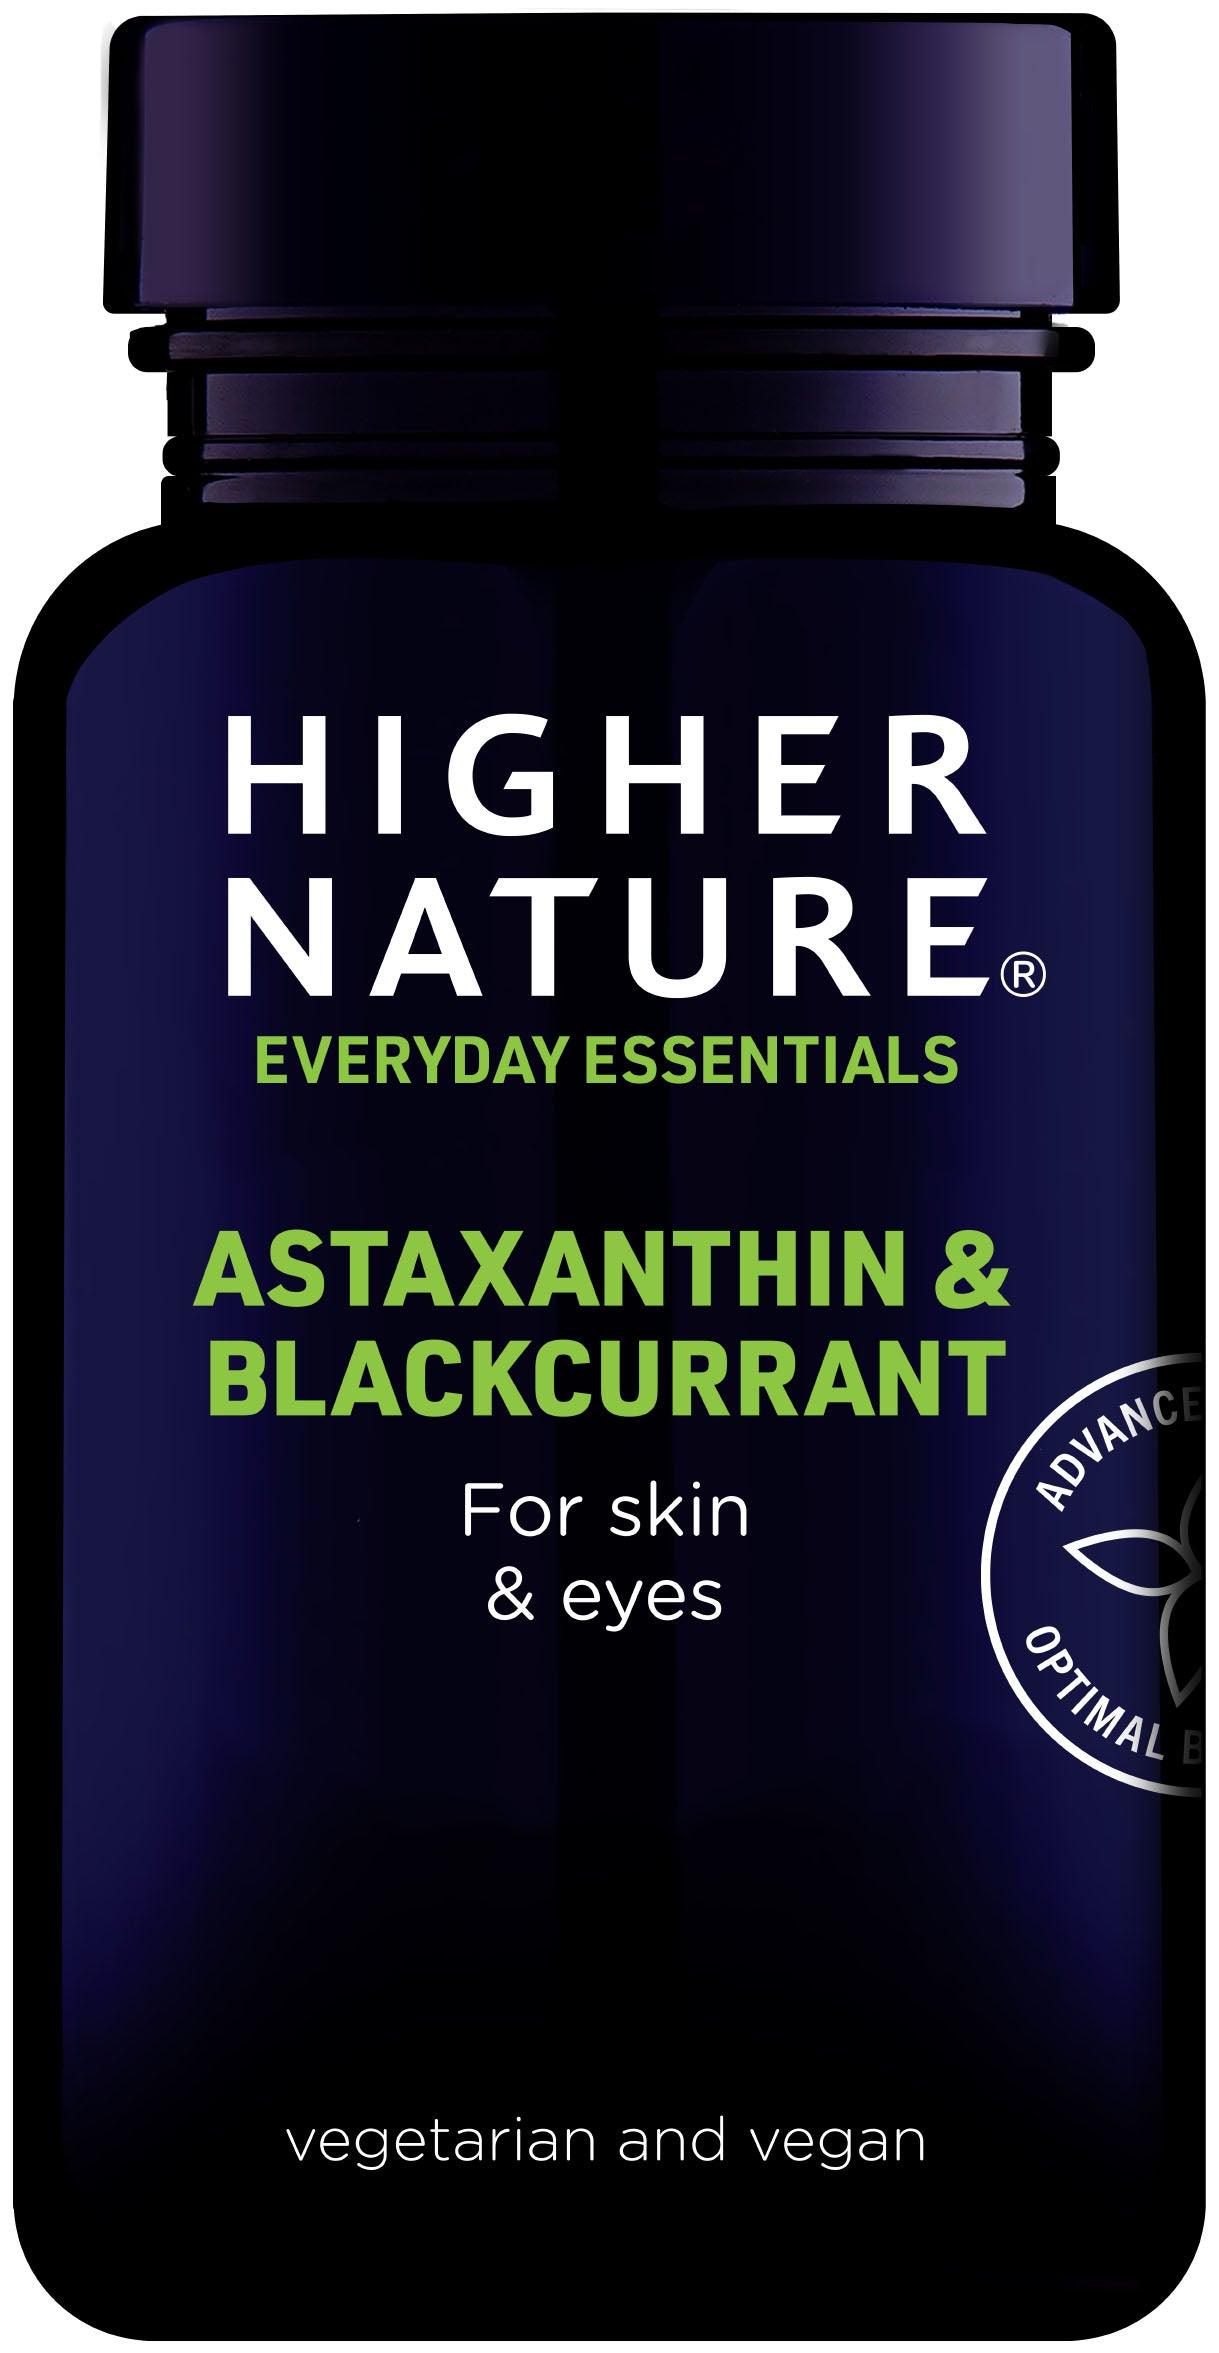 Higher Nature Astaxanthin & Blackcurrant 30's - Approved Vitamins